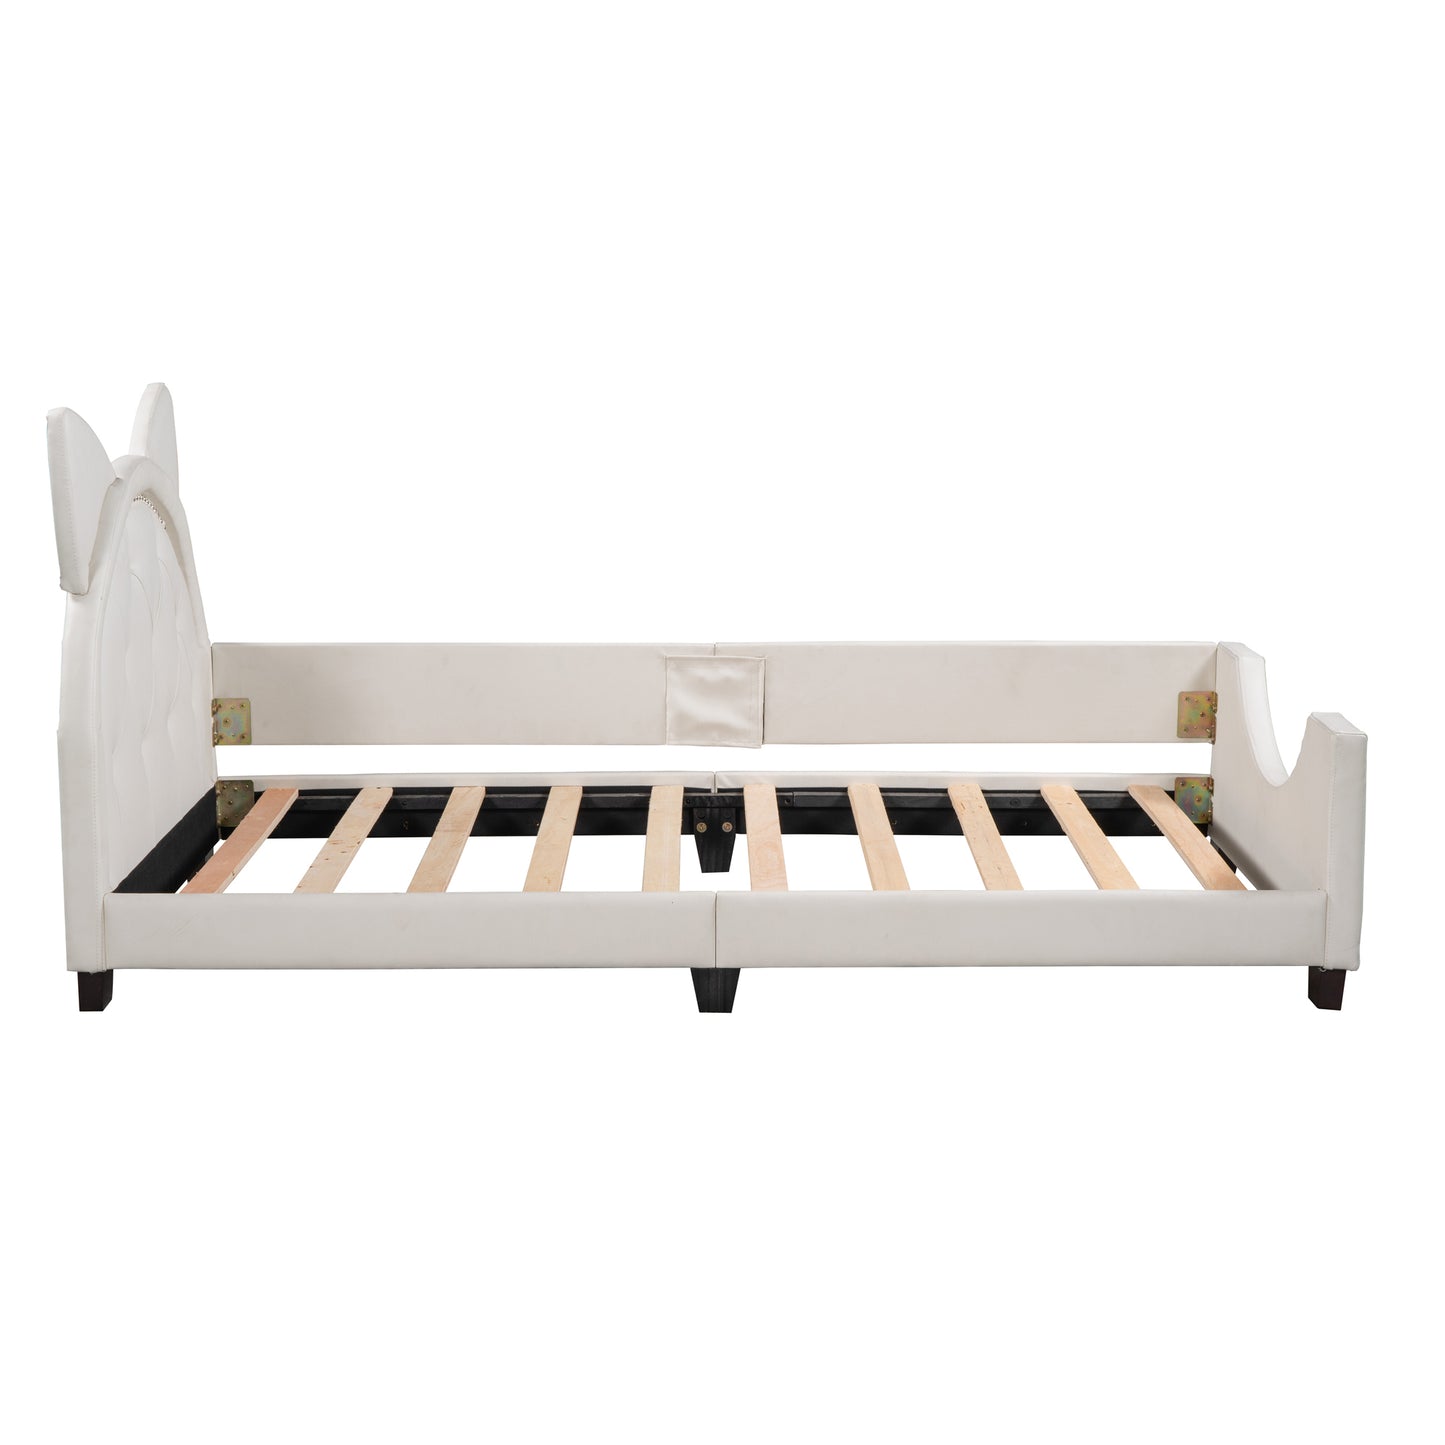 Twin Size Upholstered Daybed with Carton Ears Shaped Headboard, White